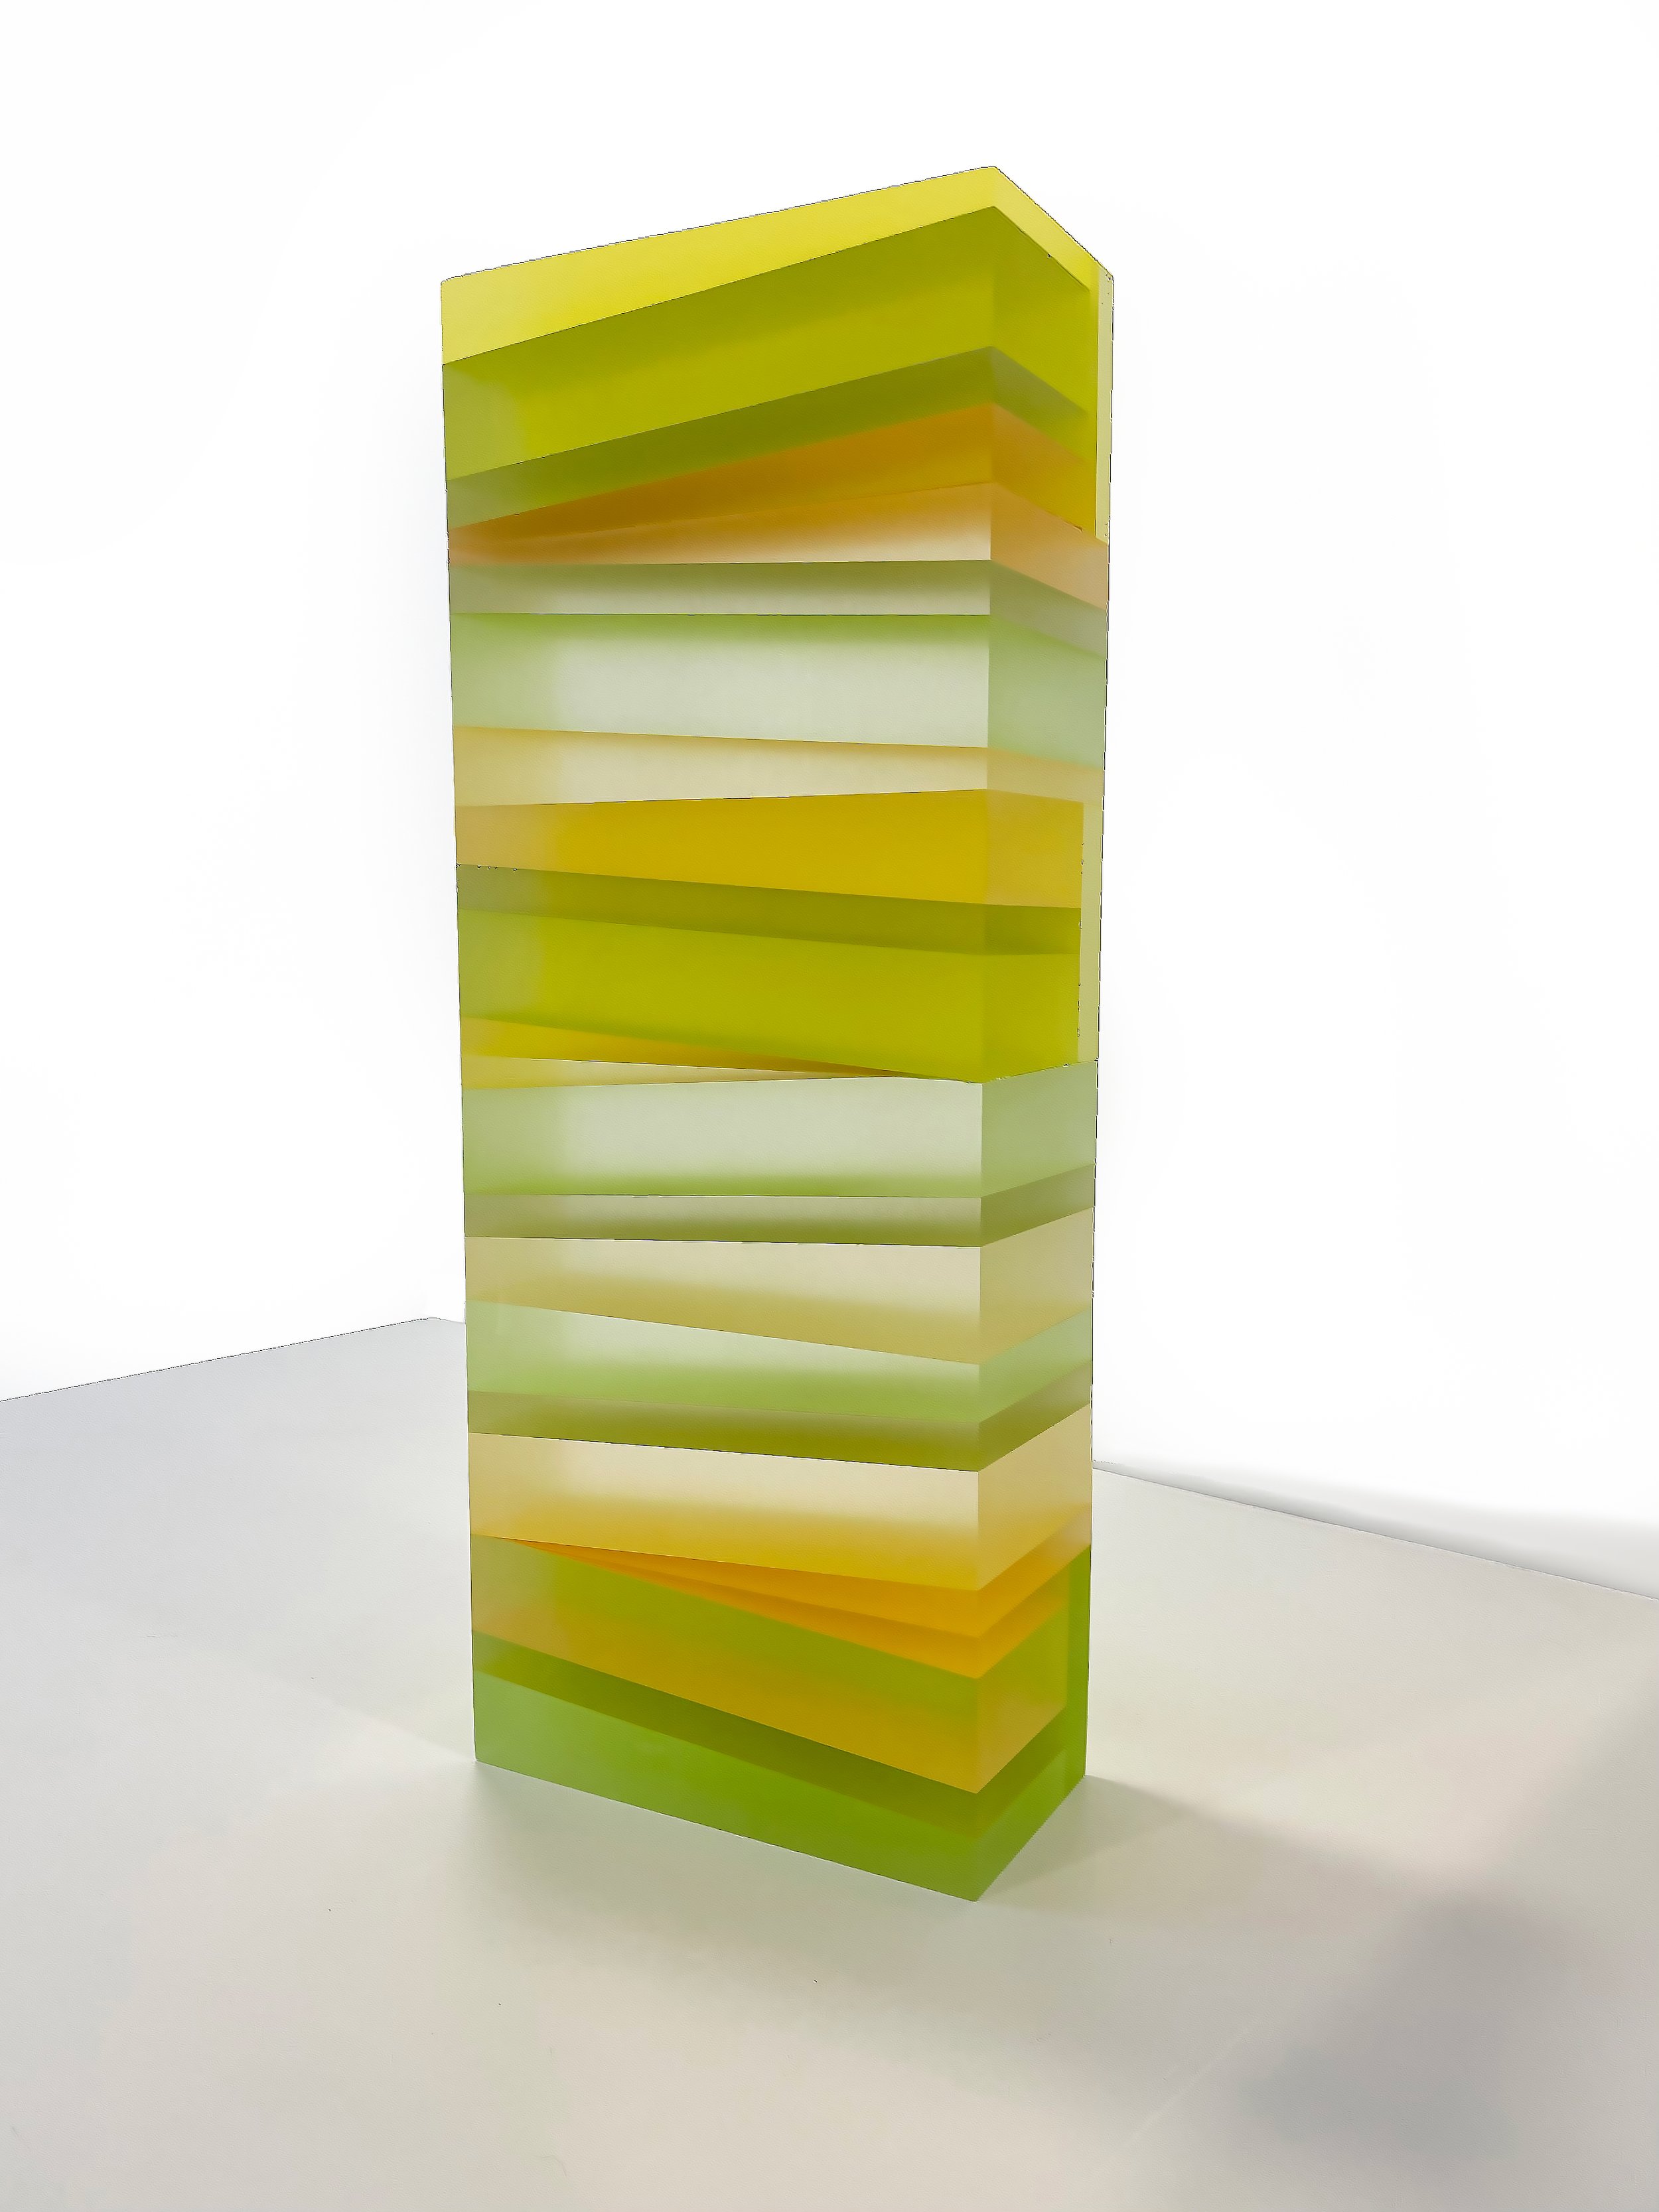 VALLEY WEAVE | 22 x 8.5 x 4.25 inches / 55.9 x 21.6 x 10.8 cm, mixed media on hand cut lucite, 2022